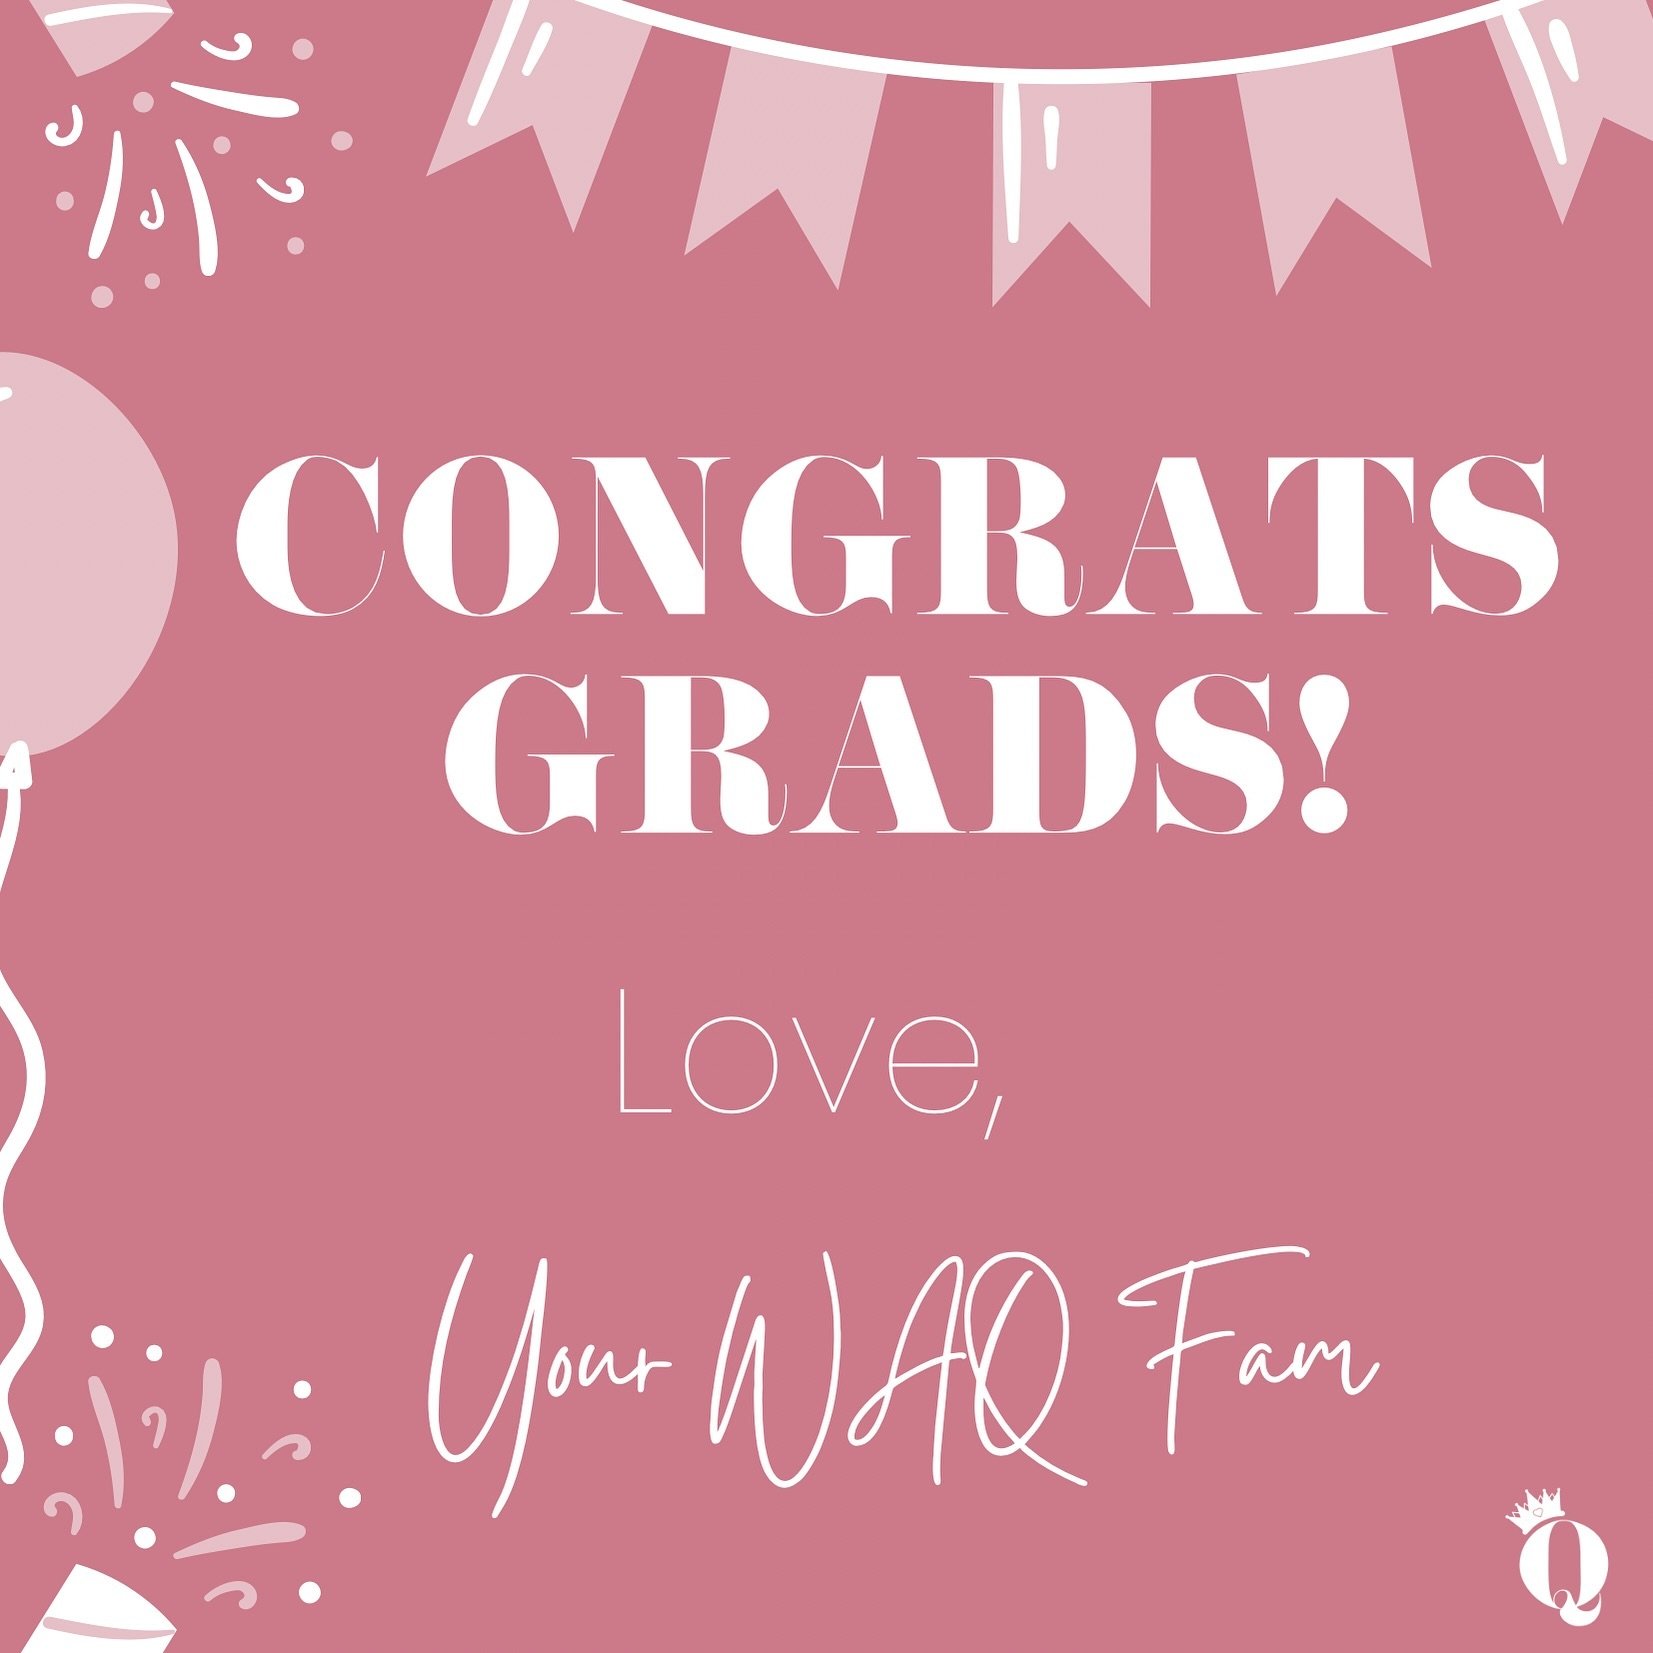 Celebrating all the hard work and dedication that led to this moment - congrats, grads! We are so proud of our WAQ Fam! 🎓🎉 #CongratsGrads